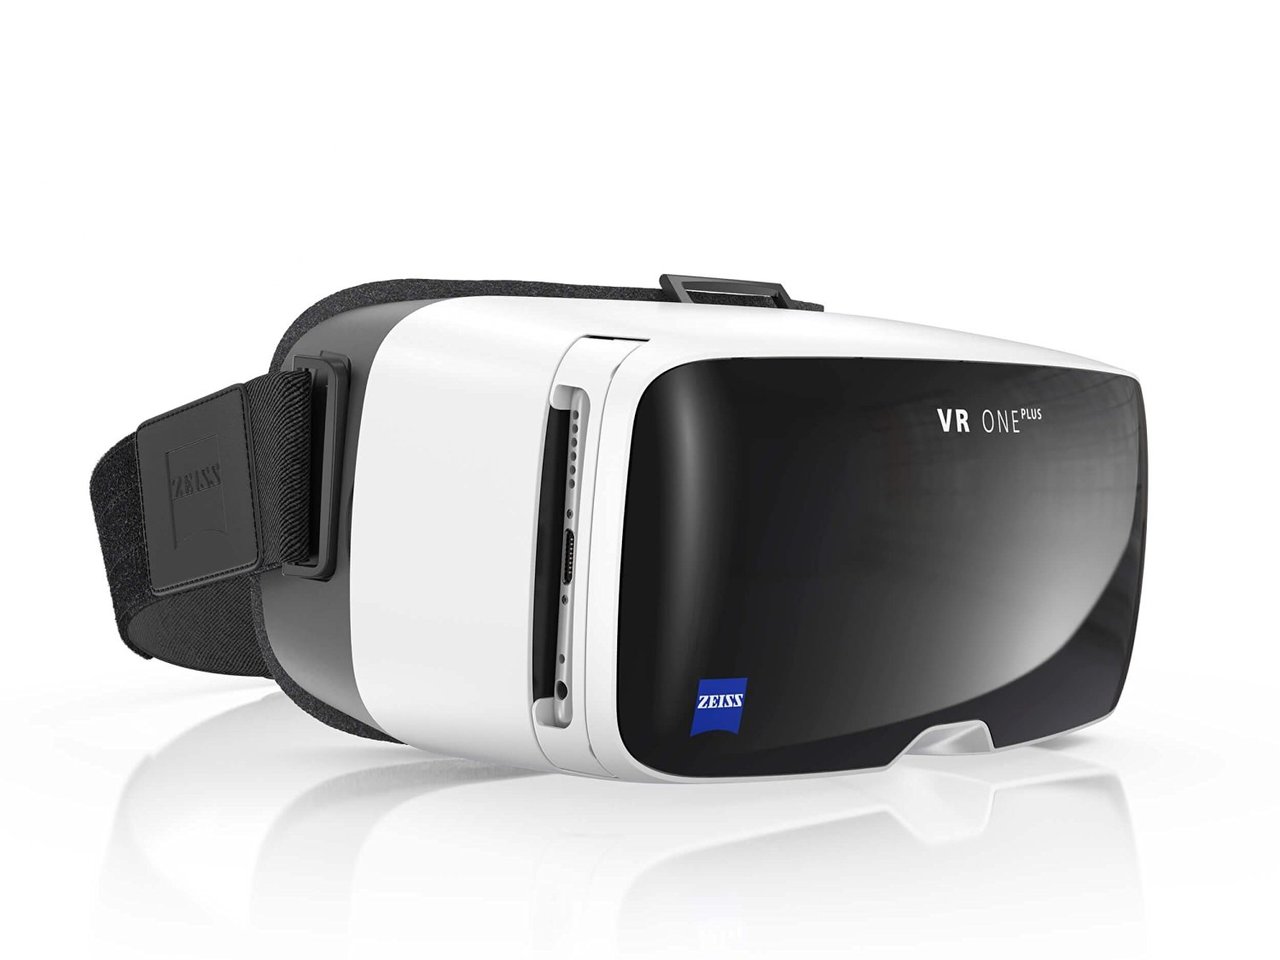 VR OnePlus Review - Taking A Look At The Sony ZEISS VR